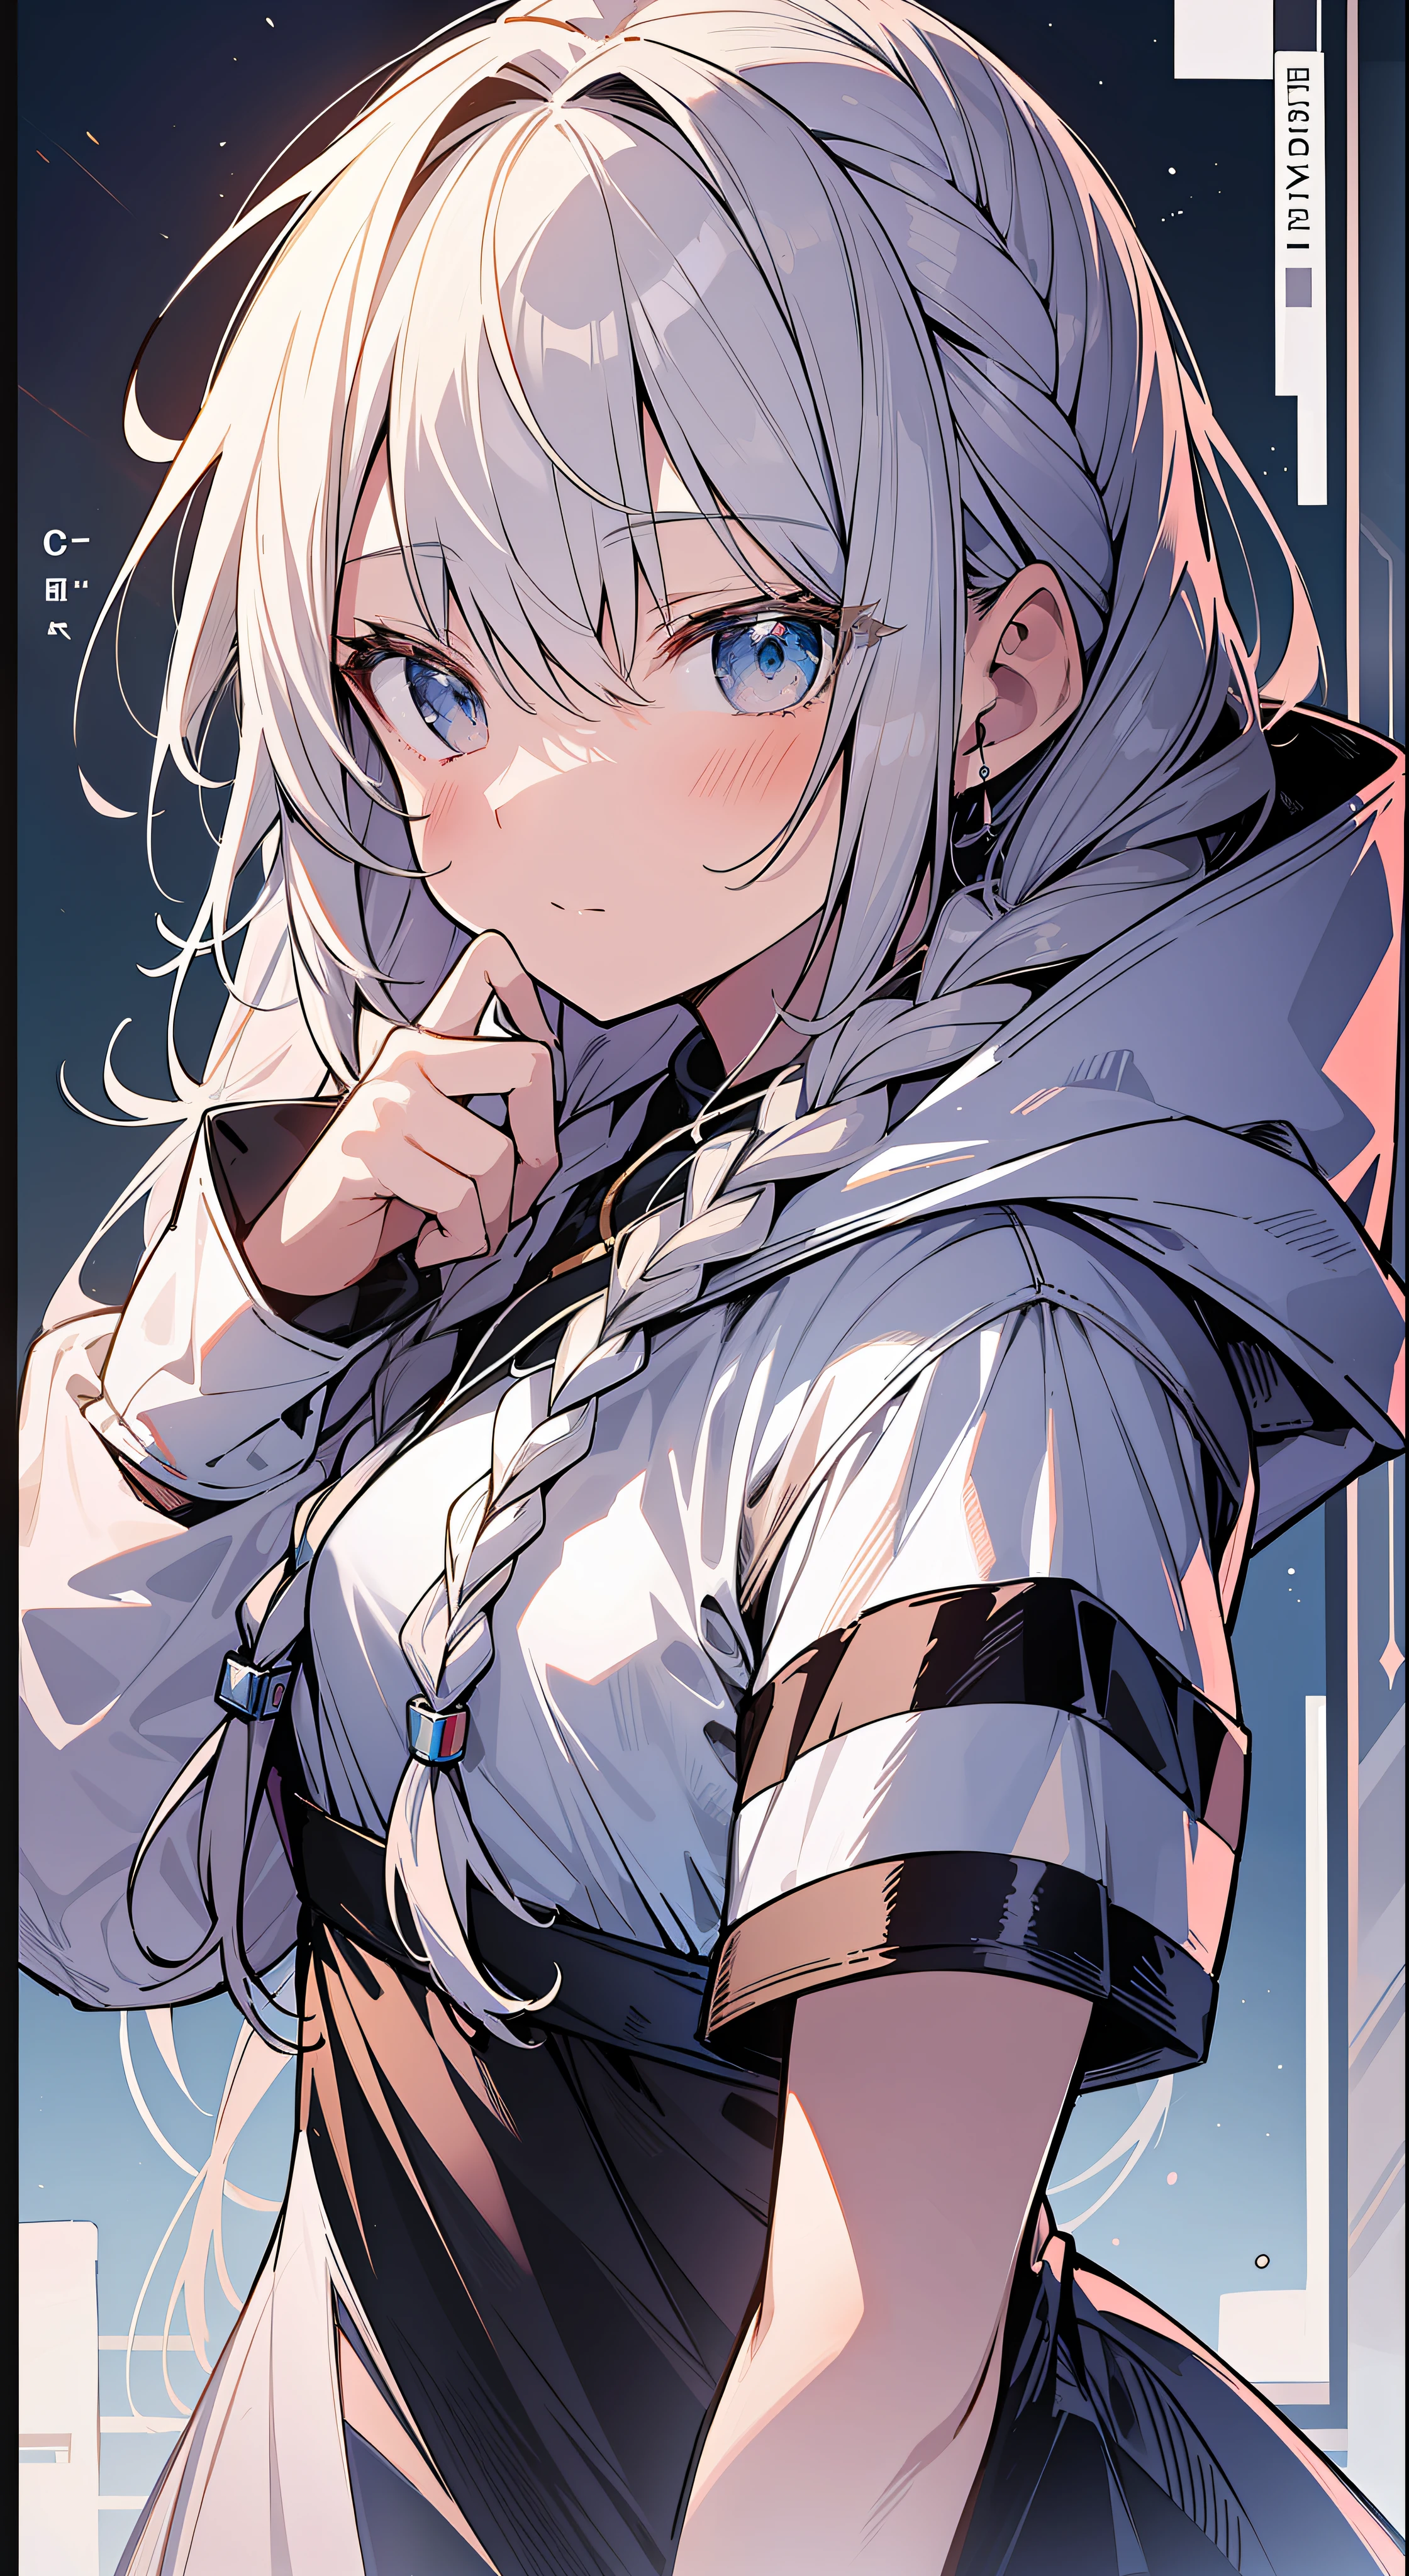 Top Quality, Masterpiece, High Resolution, 8k, Hoodie and Anime Style Girl, One Girl, Detailed Line Art, Bright White and Bright Amber Style, Digital Enhancement, Close Up, Anime Core, Flowing Fabric, Short Braids with shoulder-length hair, Beautiful hair